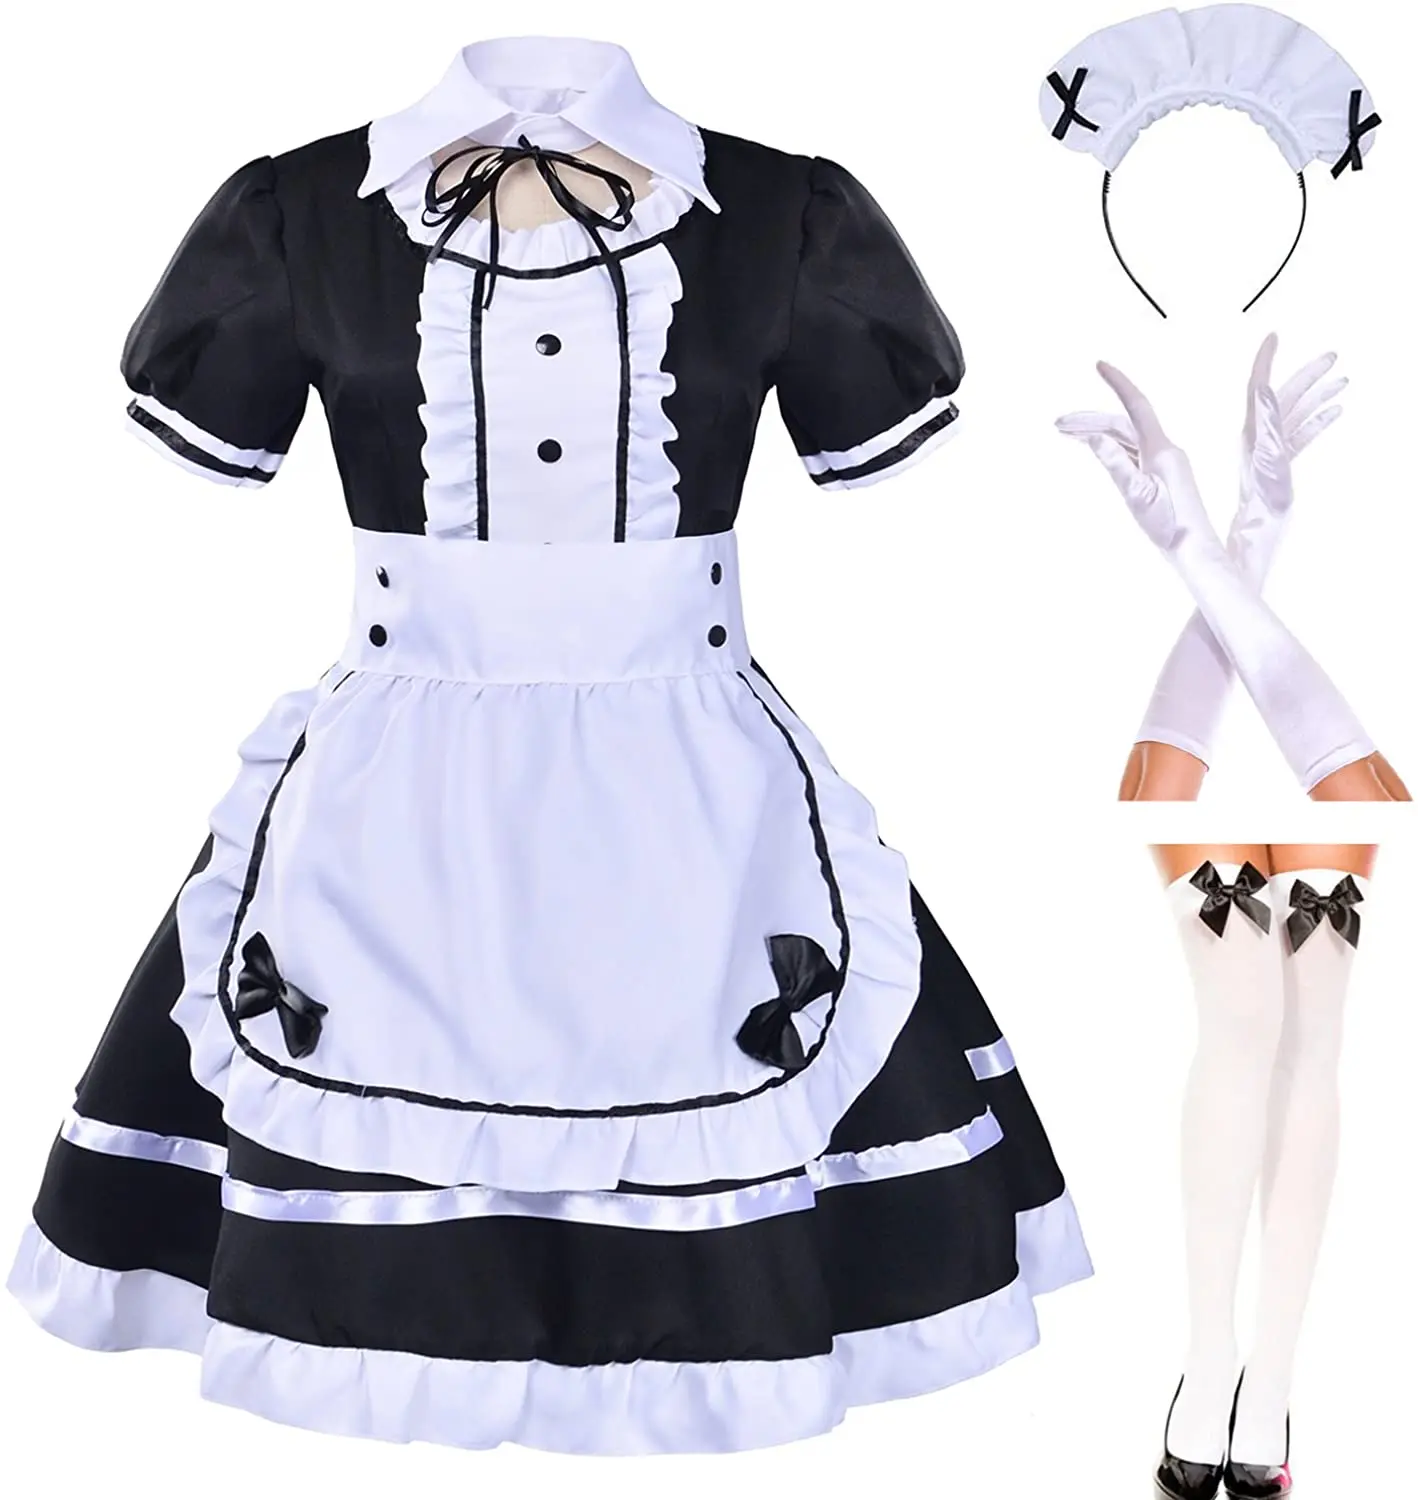 

2021 Japanese Anime Sissy Maid Dress Cosplay Sweet Classic Lolita Fancy Apron Maid Dress with Socks Gloves Set for Women Girls